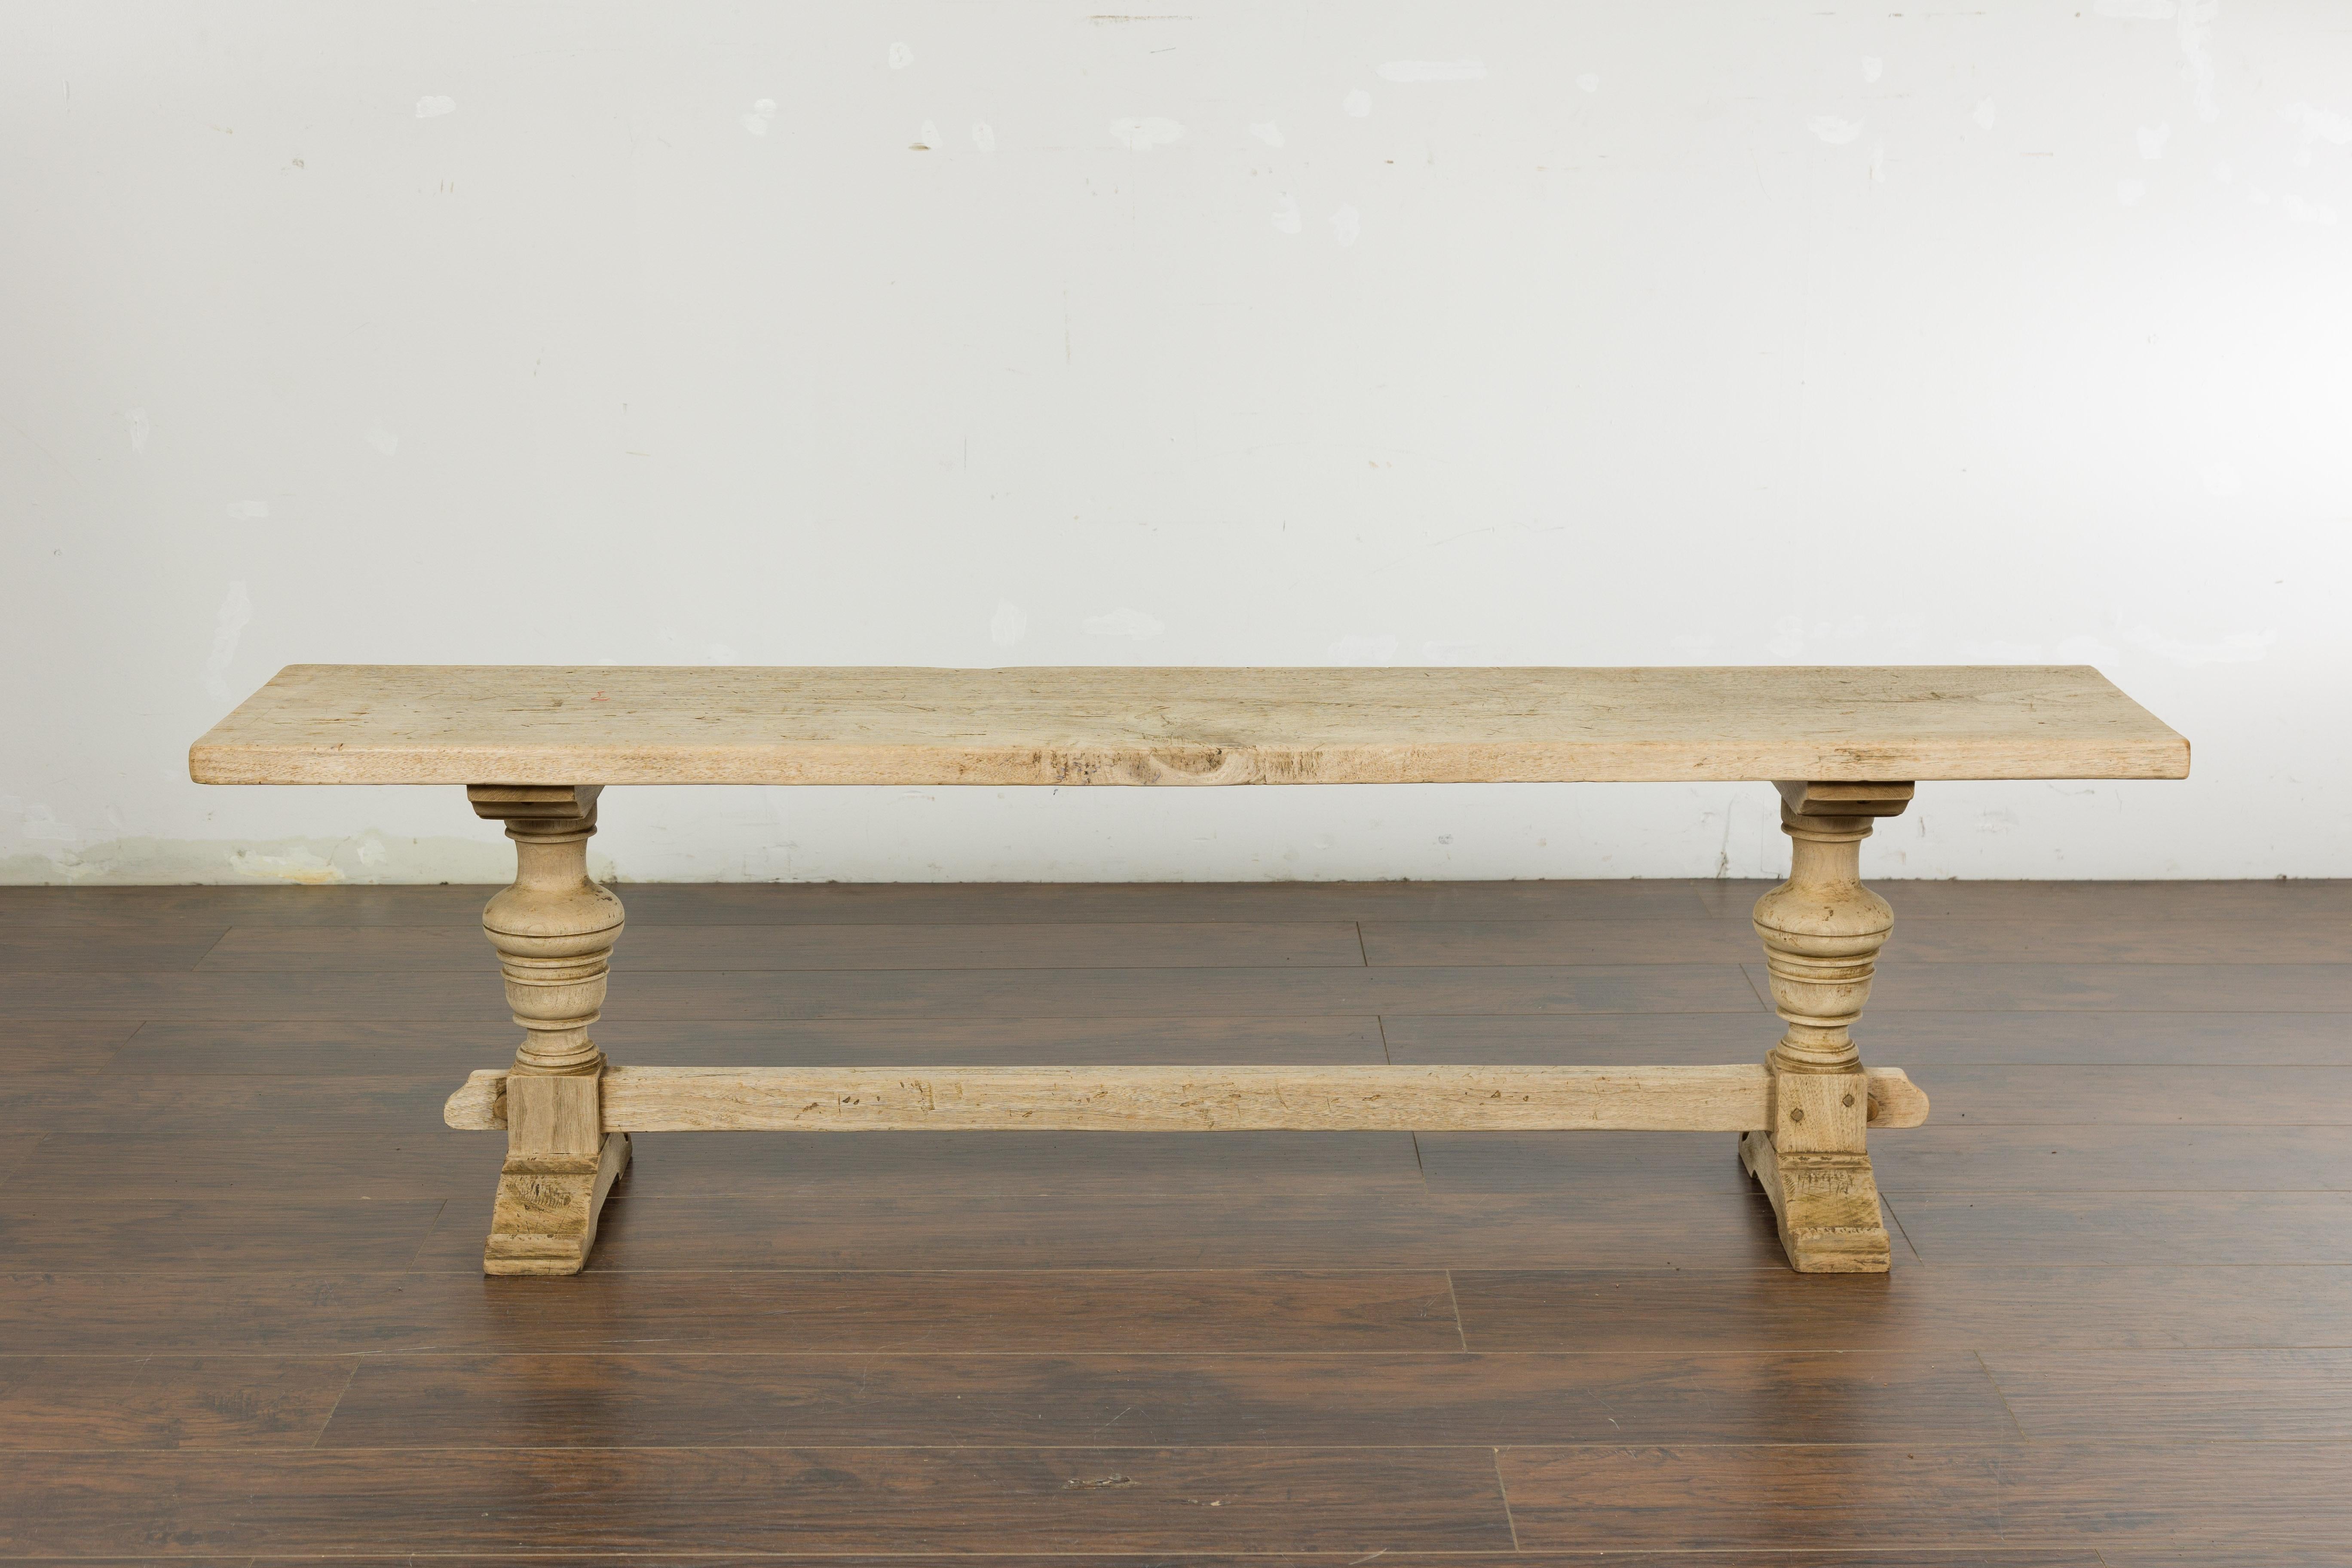 A French bleached walnut bench from the 19th century with trestle base made of two turned baluster legs connected to one another through a plain cross stretcher. Emanating a harmonious blend of rustic allure and timeless elegance, this 19th-century